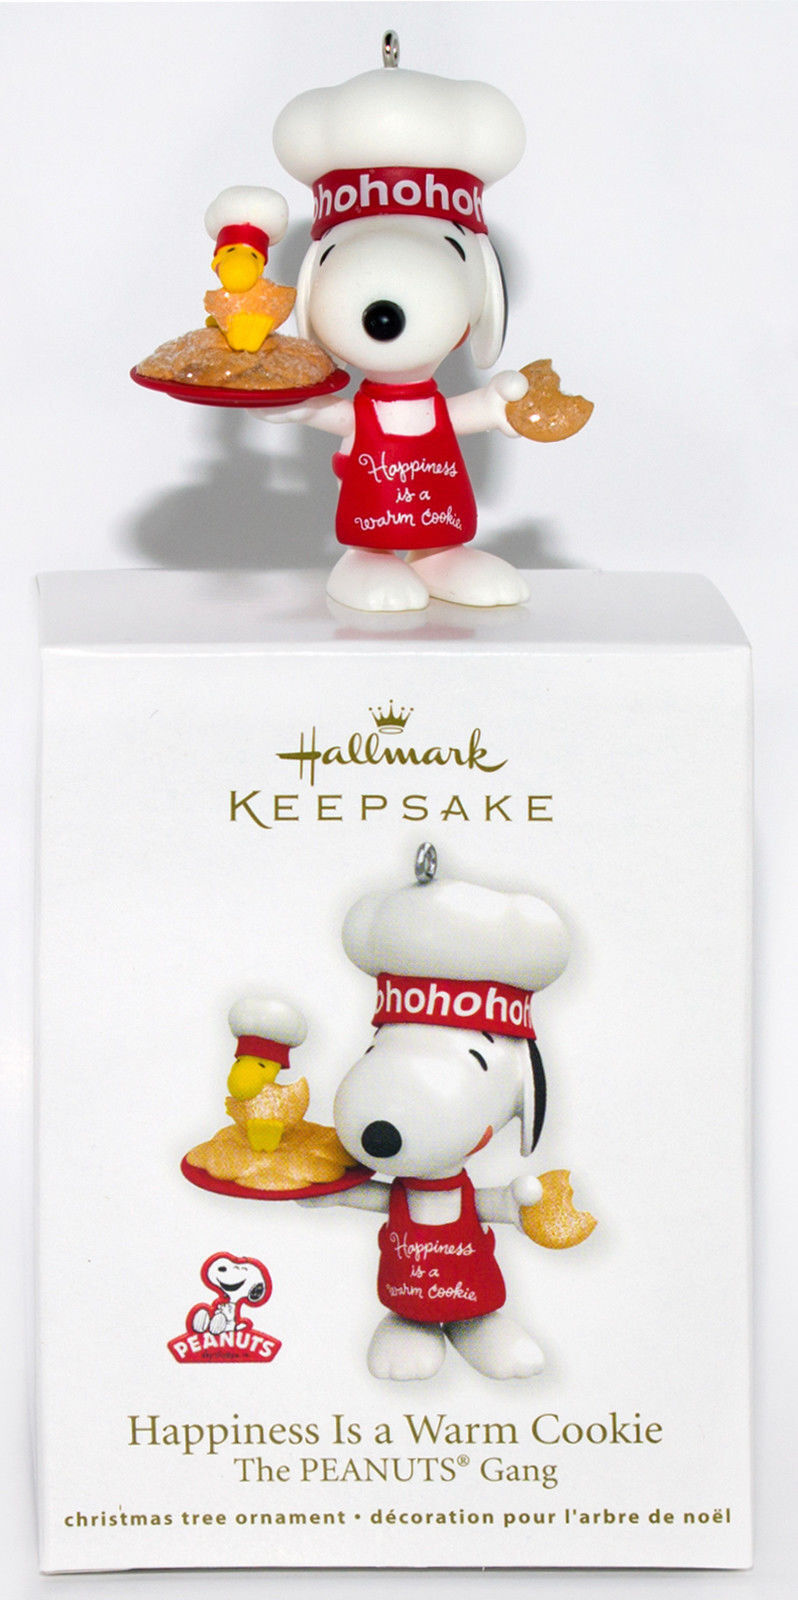 2011 HAPPINESS IS A WARM COOKIE NEW Hallmark Peanuts Snoopy Ornament PUPPY DOG